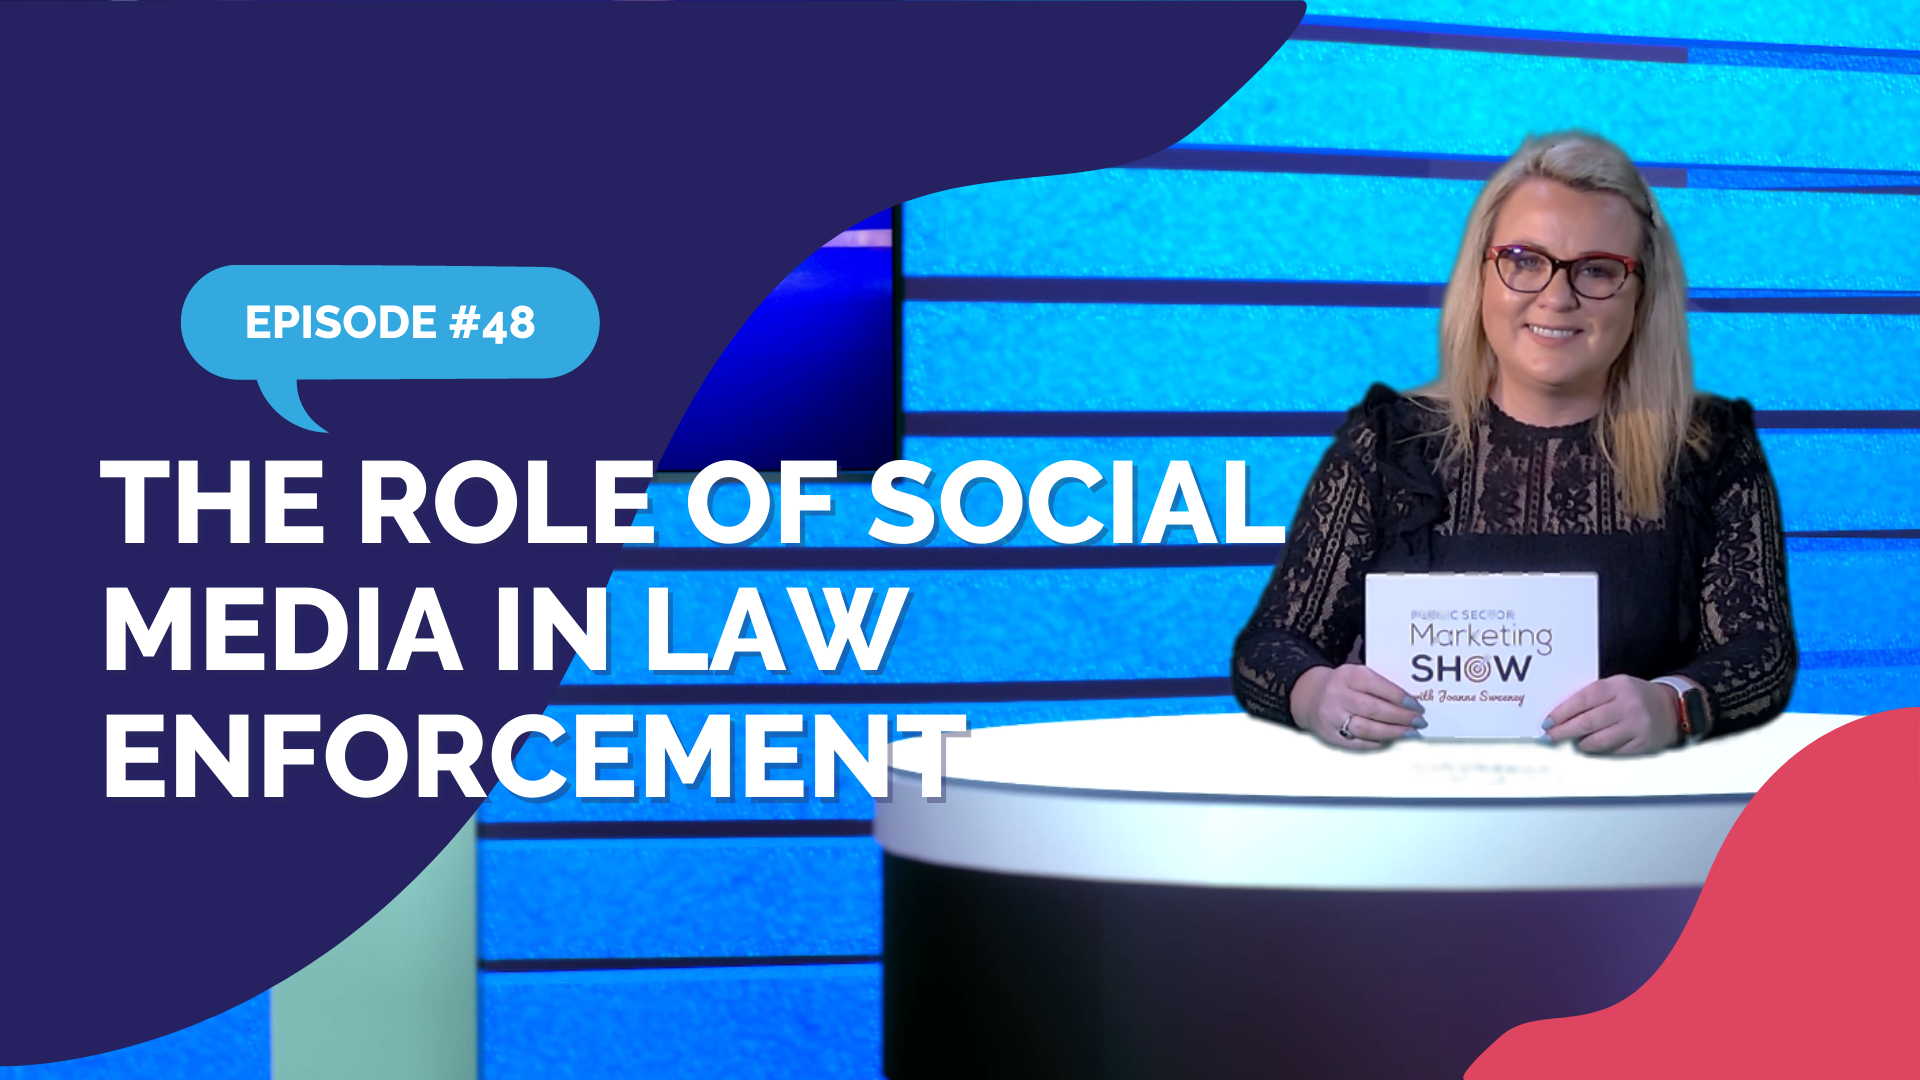 Episode 48 - The Role of Social Media in Law Enforcement